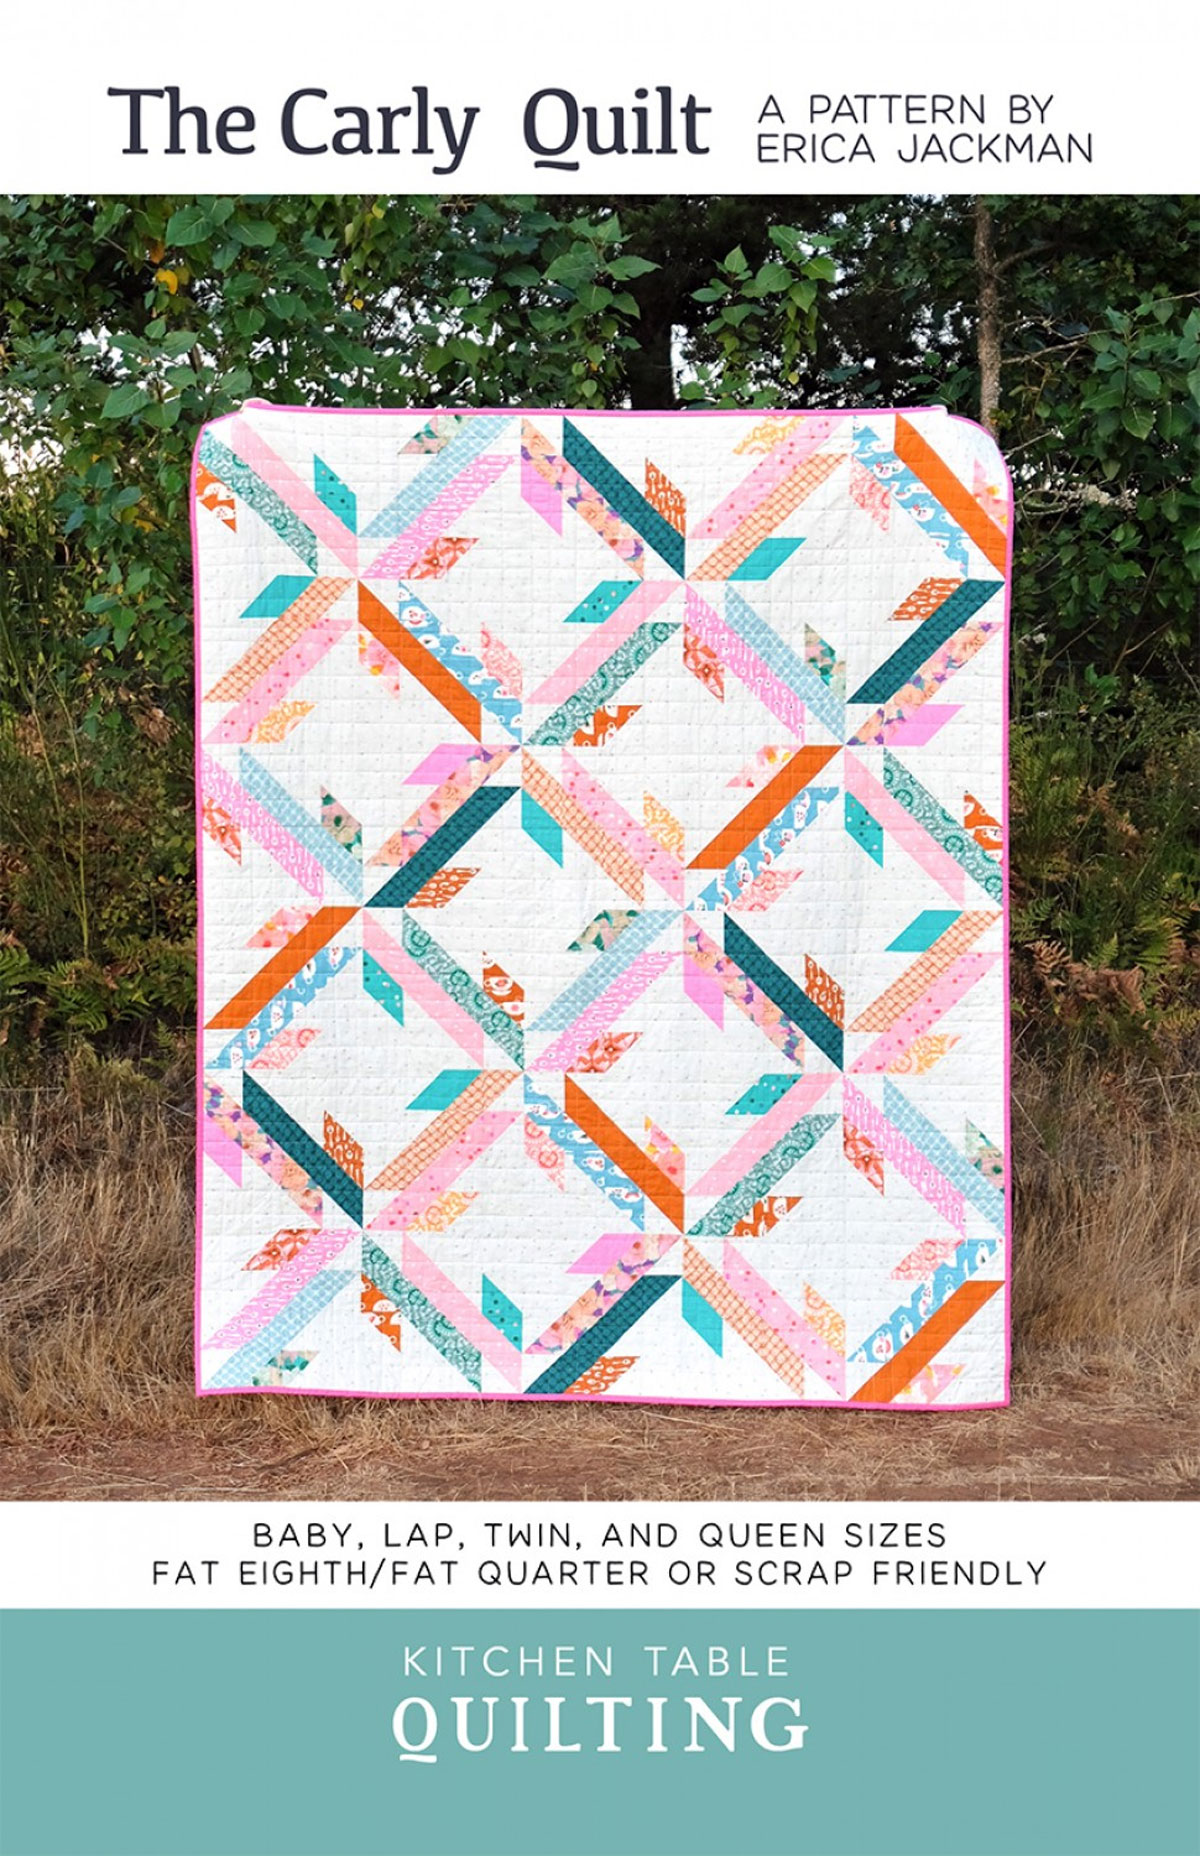 The-Carly-quilt-sewing-pattern-Kitchen-Table-Quilting-Erica-Jackman-front